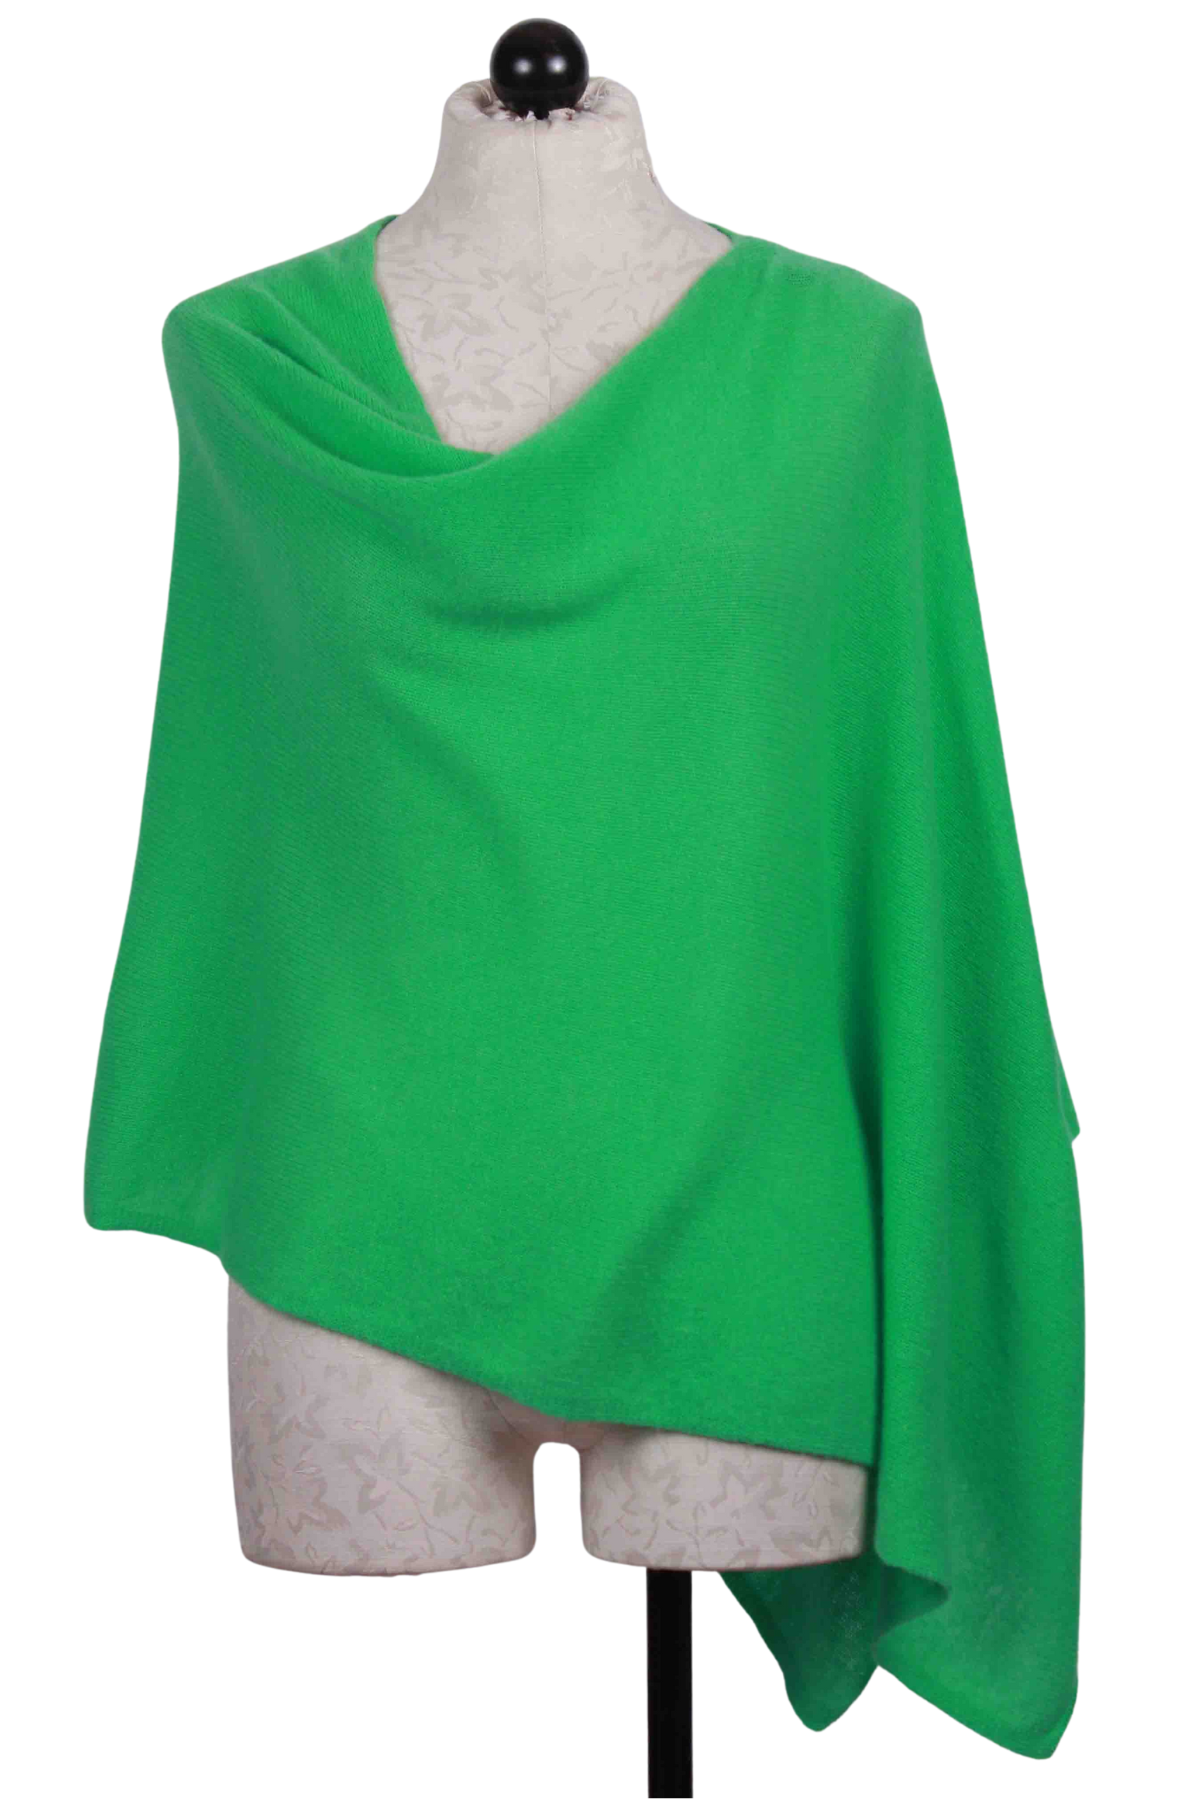 Kelly Draped Cashmere Dress Topper by Alashan Cashmere